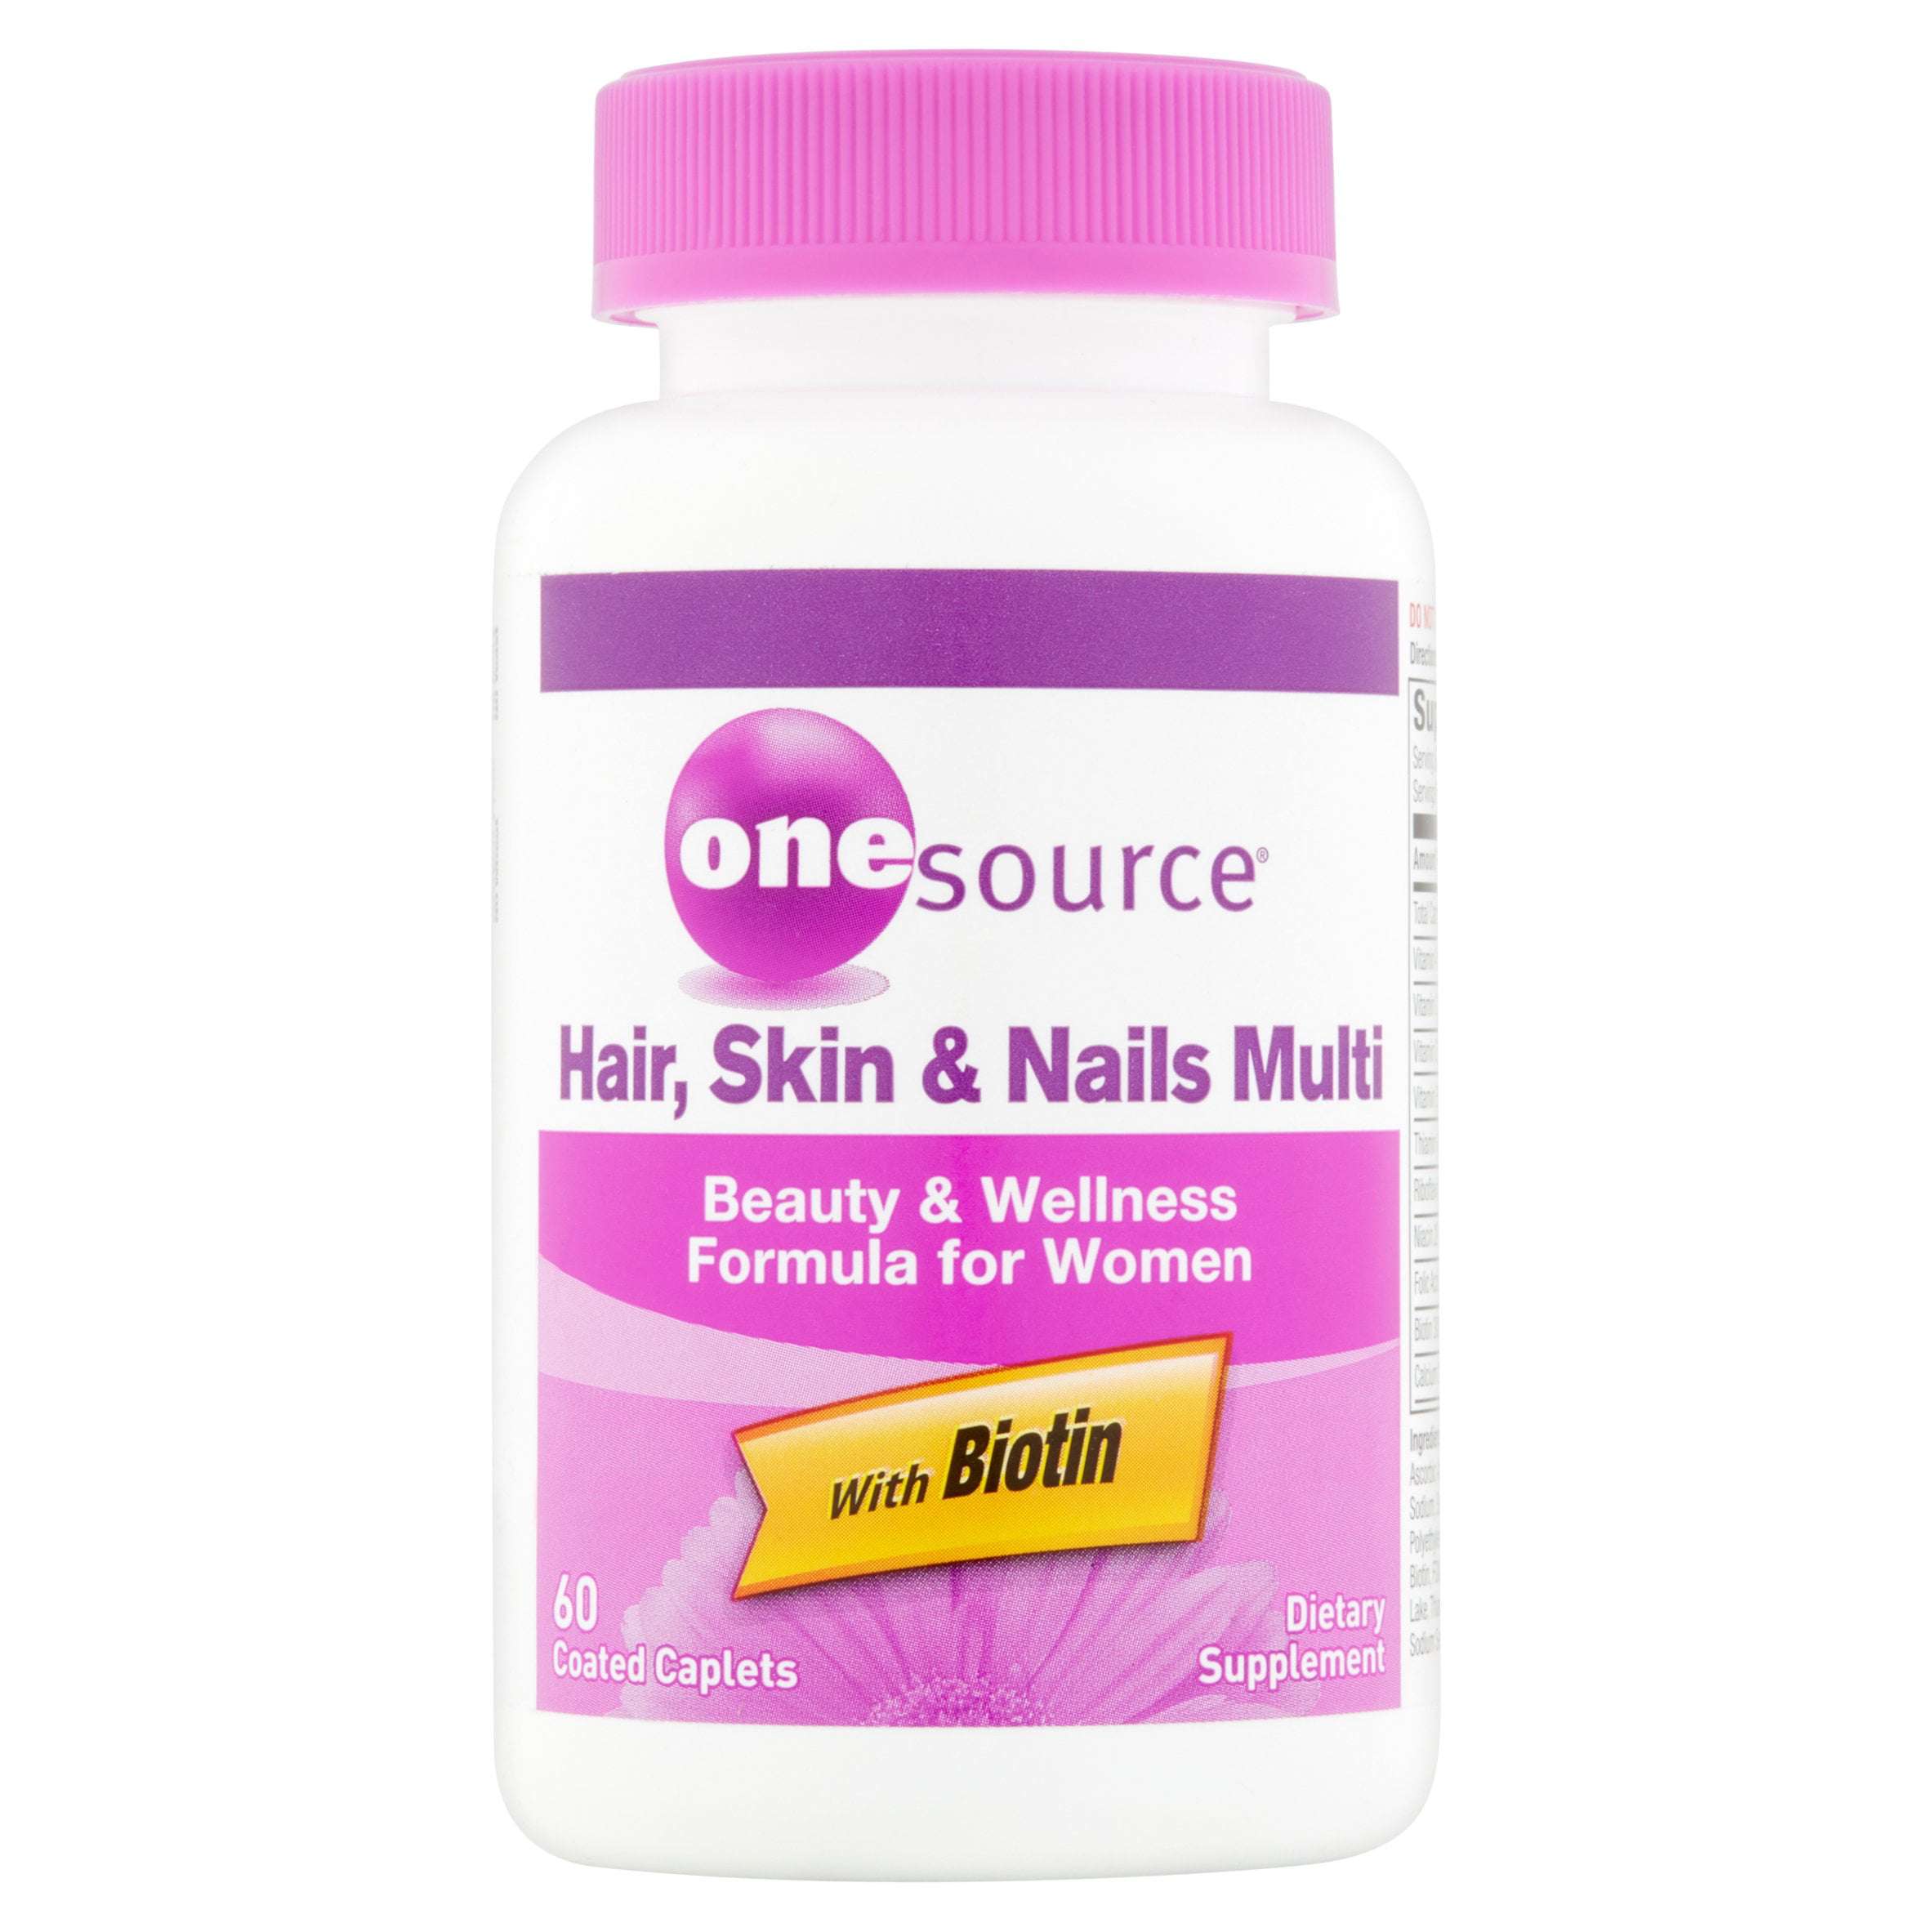 What is a OneSource multivitamin?